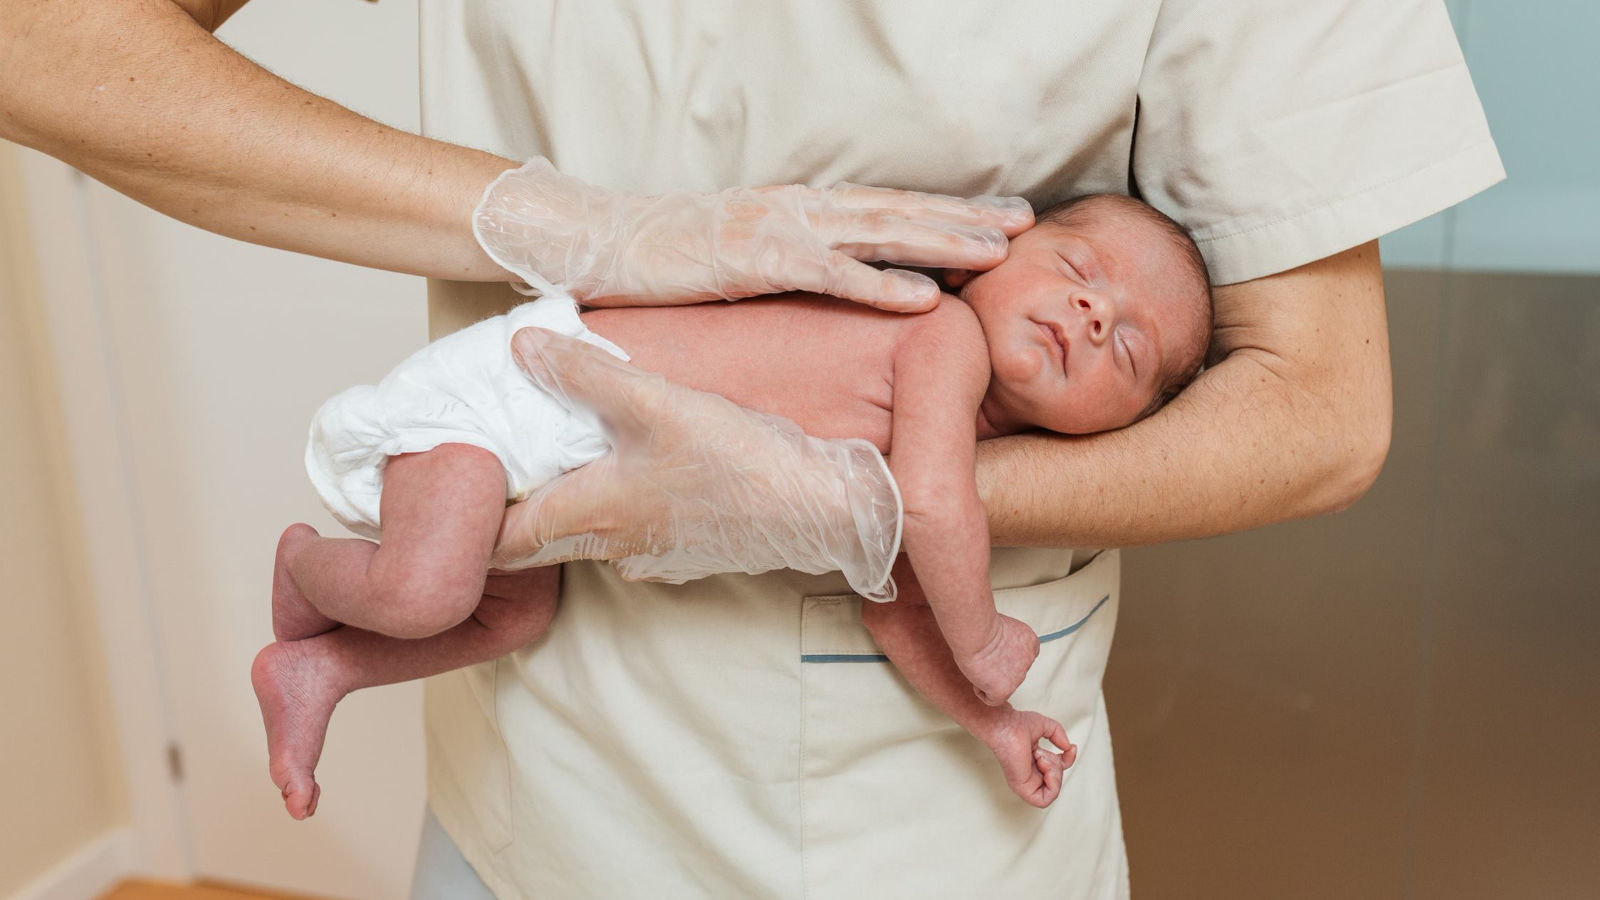 a newborn lying on their stomach, being held by a healthcare provider in ivory scrubs and wearing clear gloves.